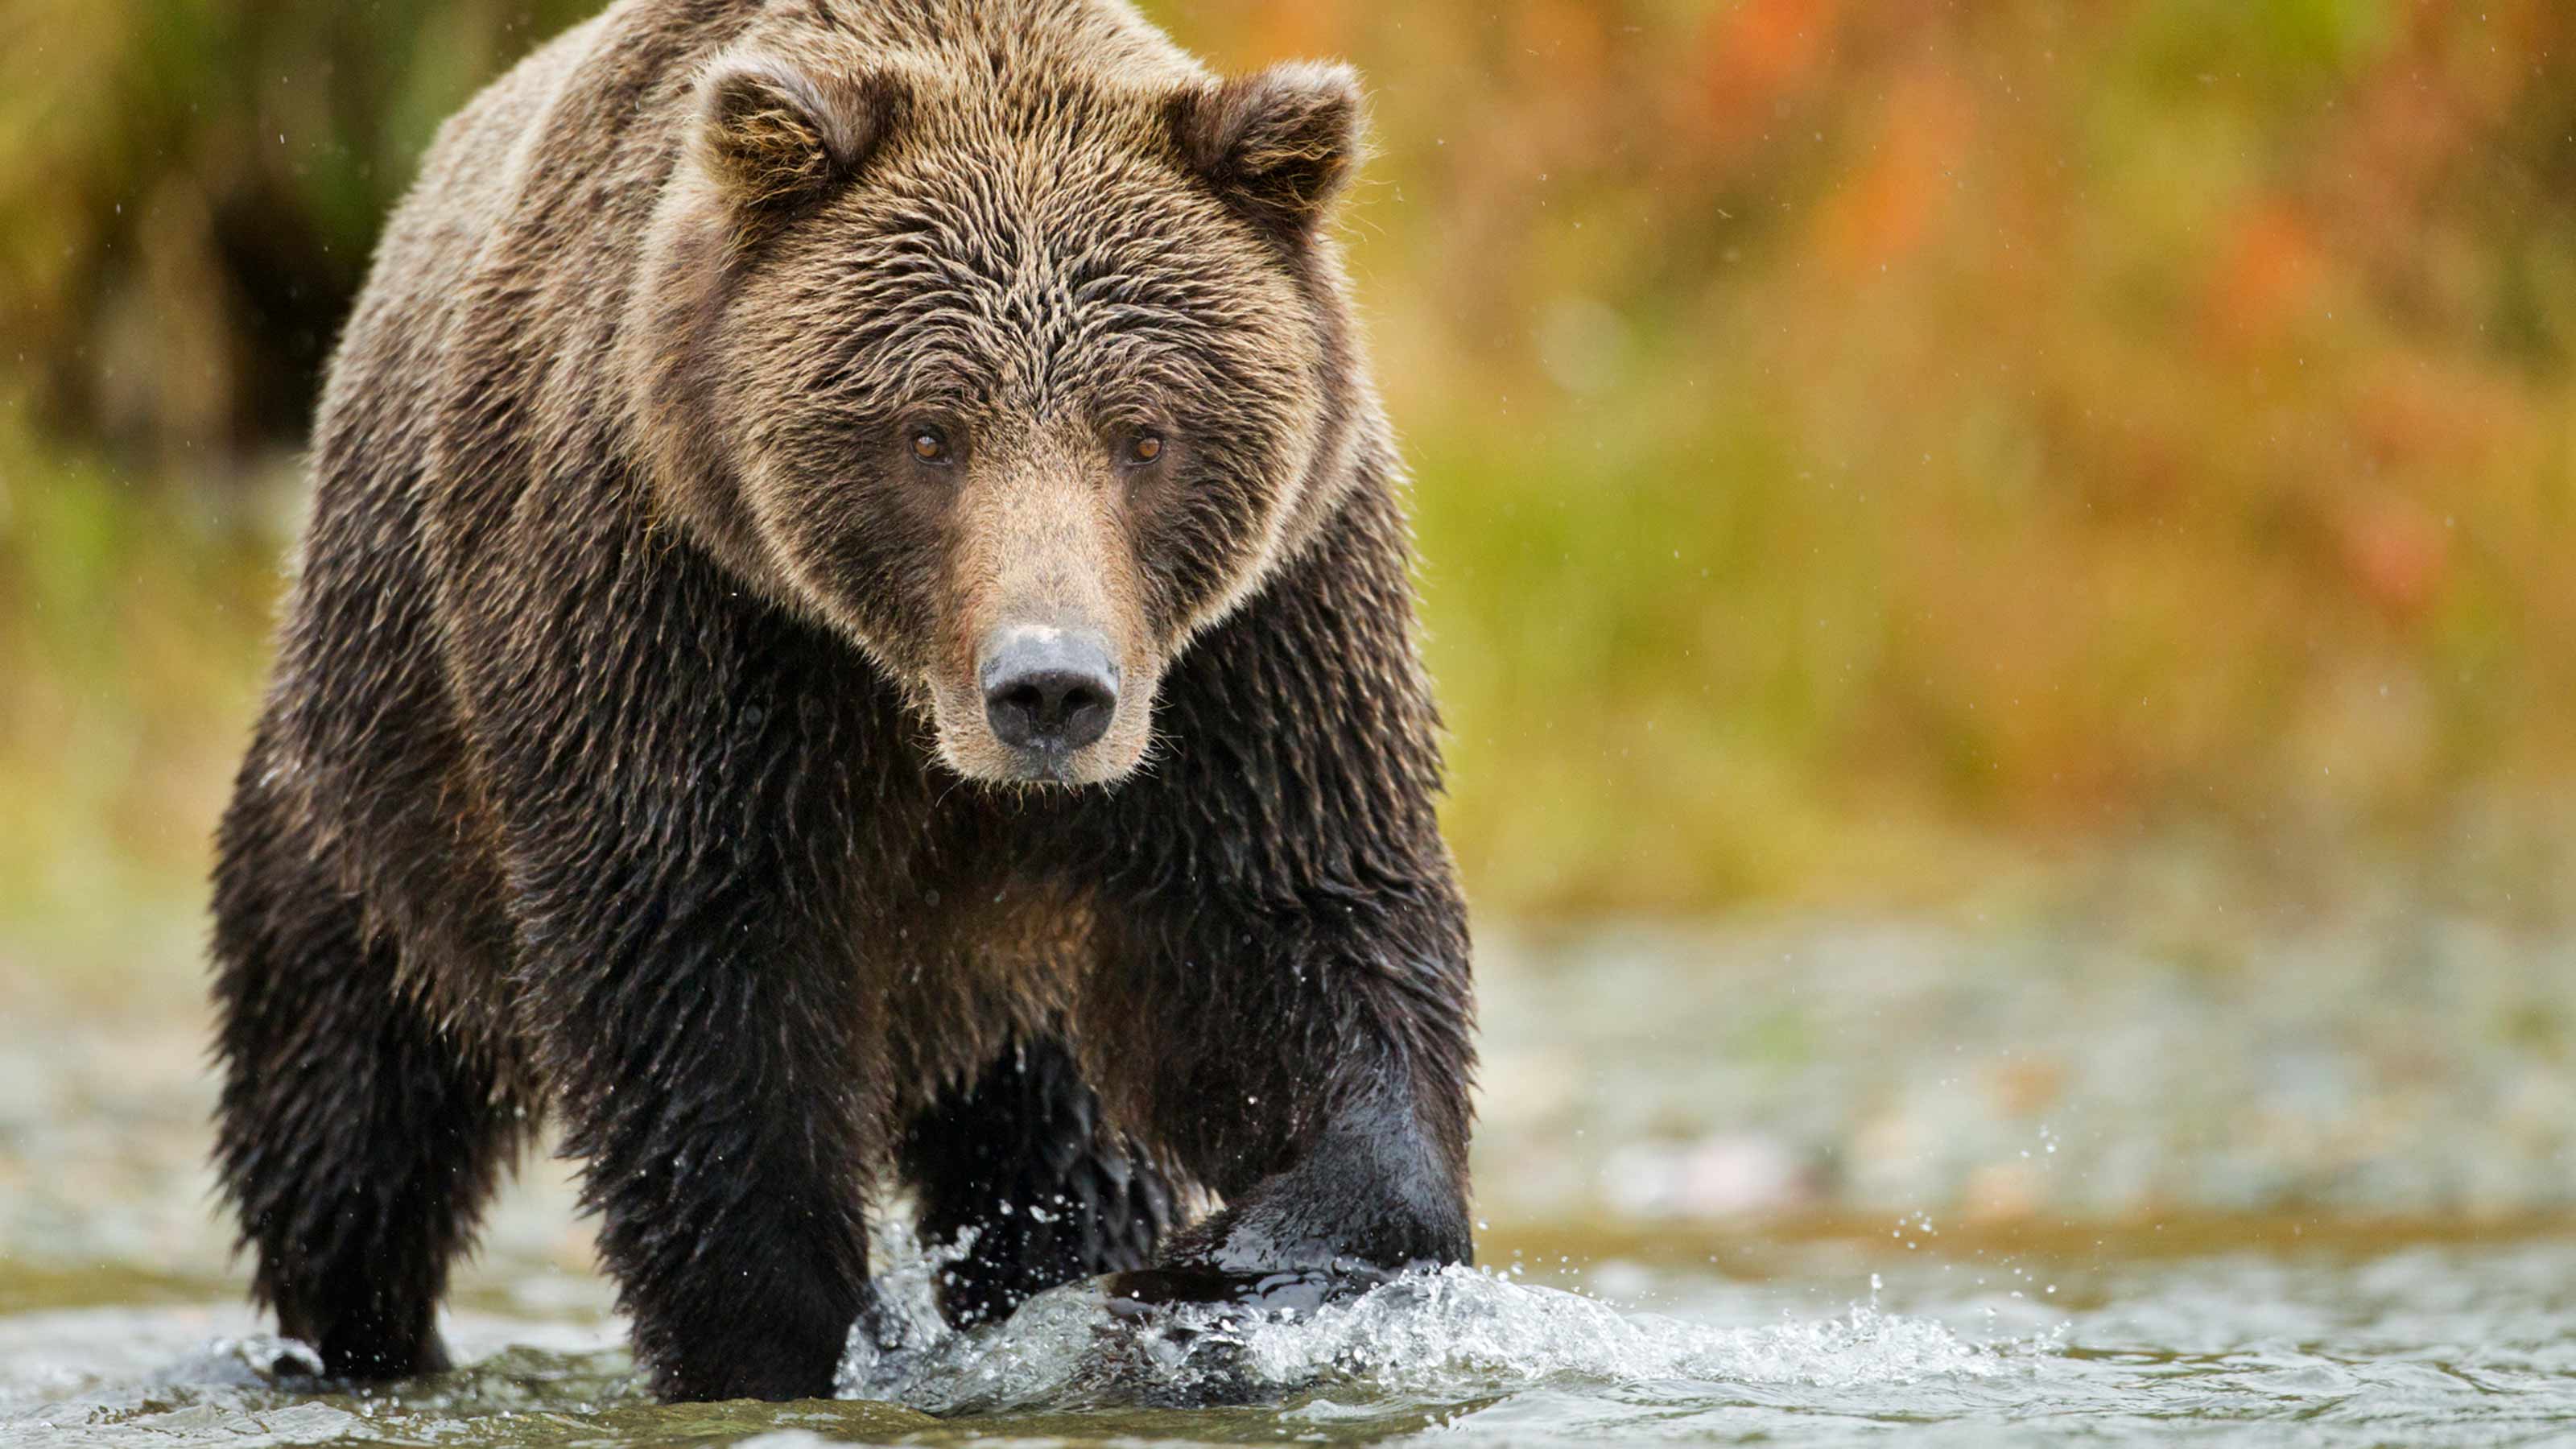 The Value Of A Portfolio Manager During A Bear Market